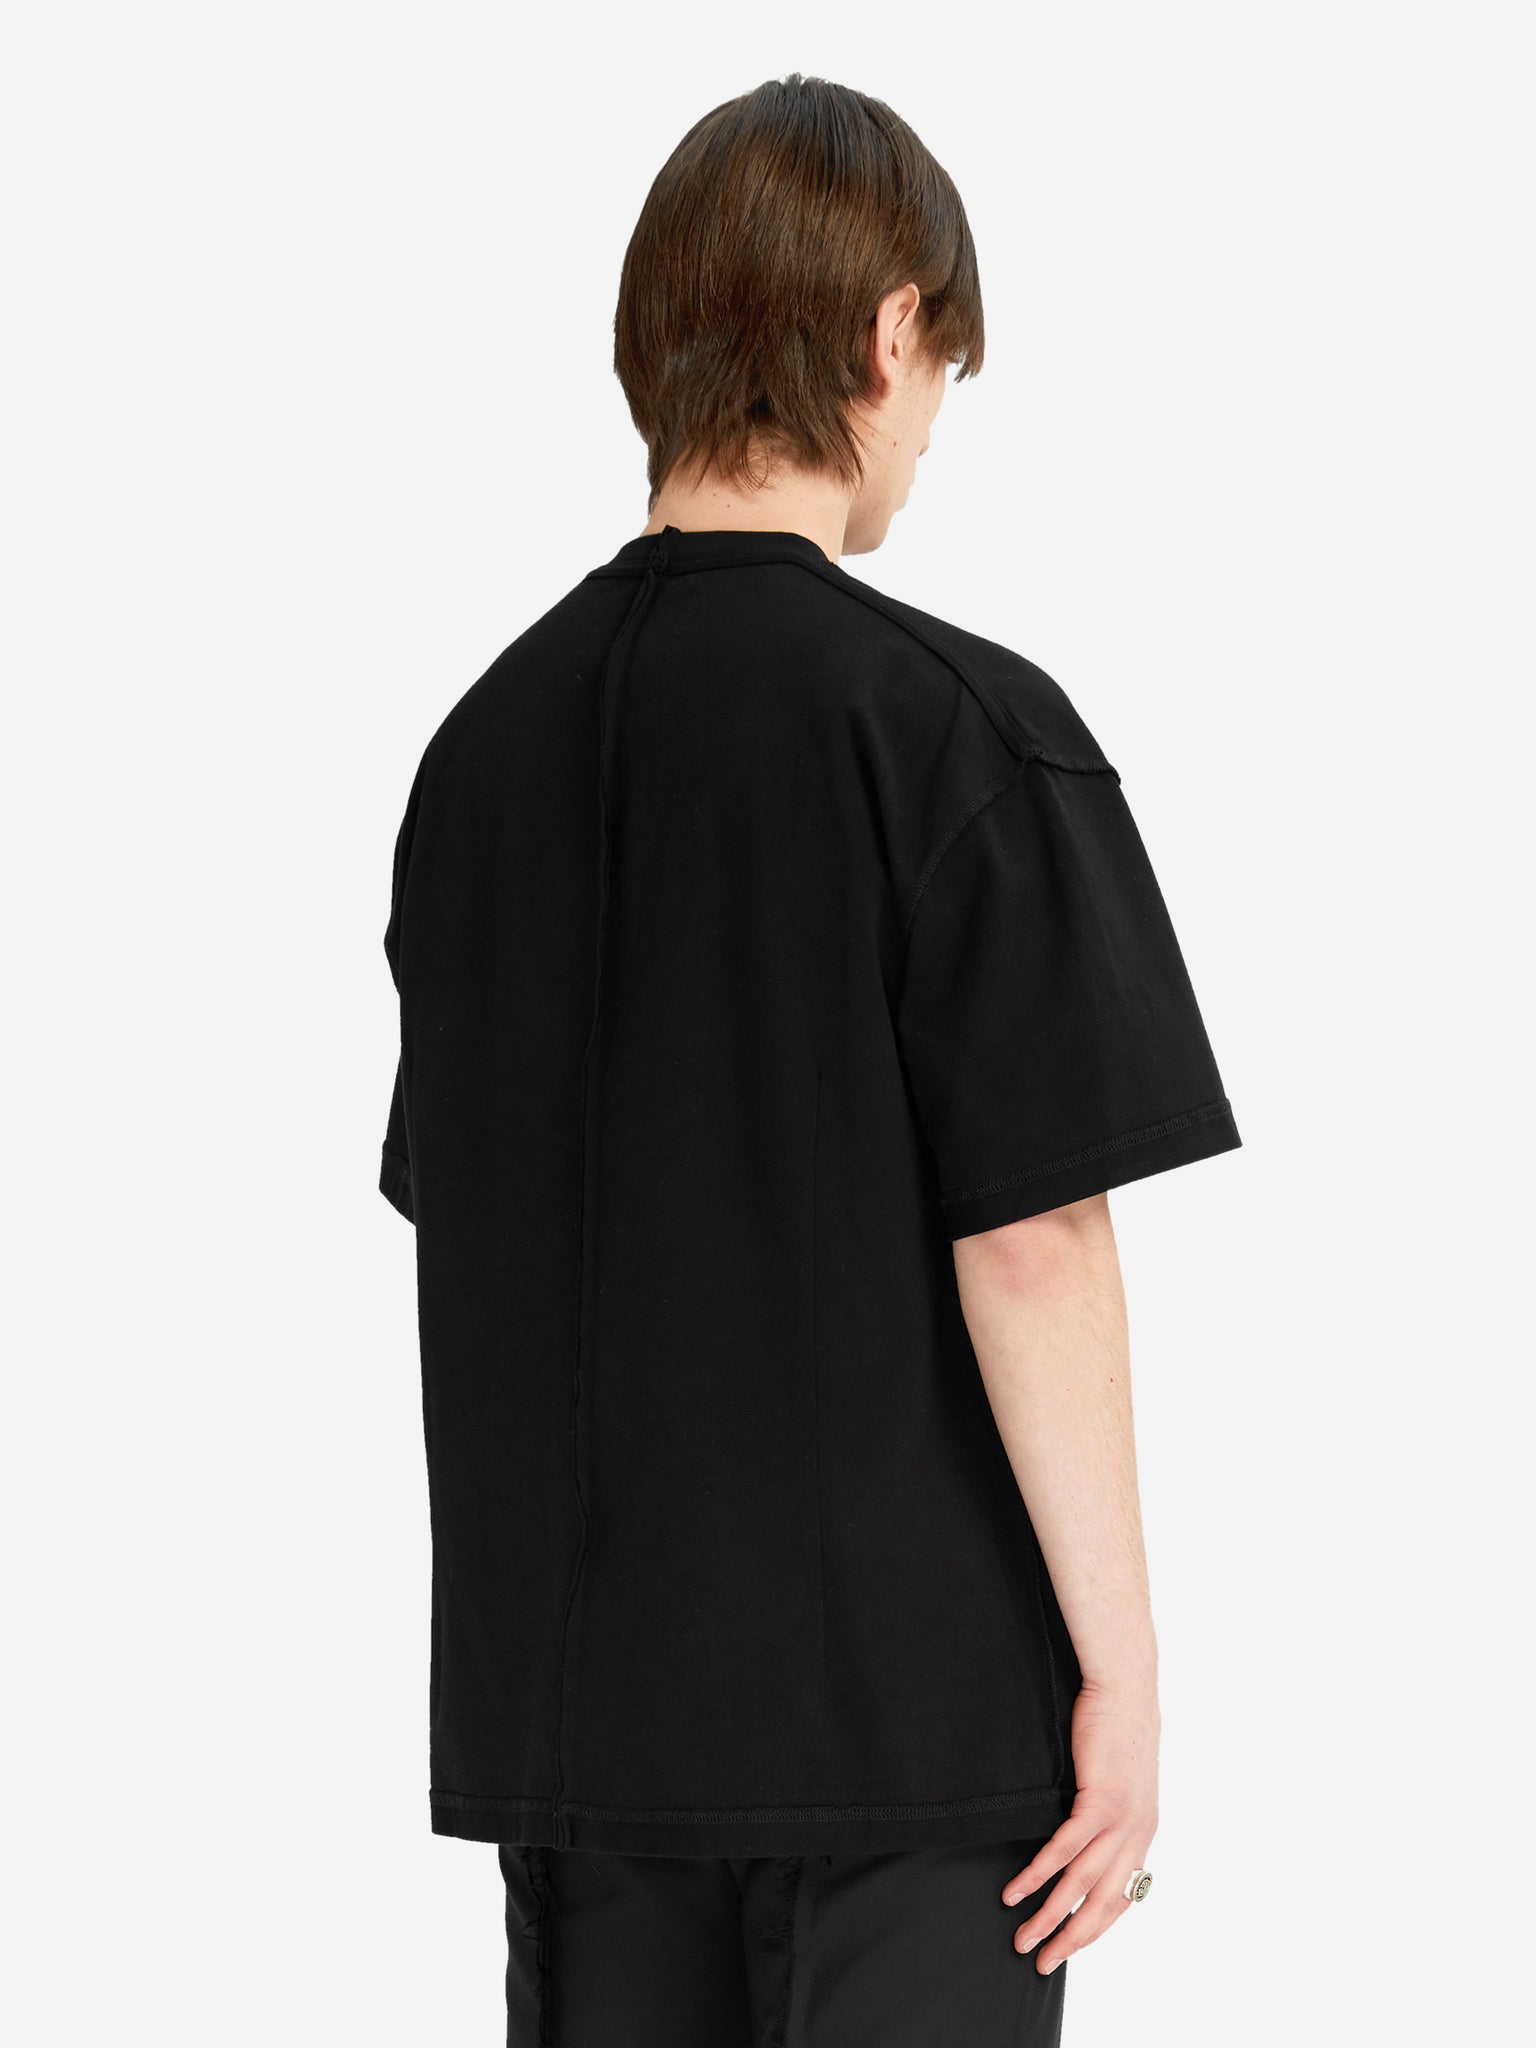 C2H4 005 Inside-Out Raw Edge T-Shirt